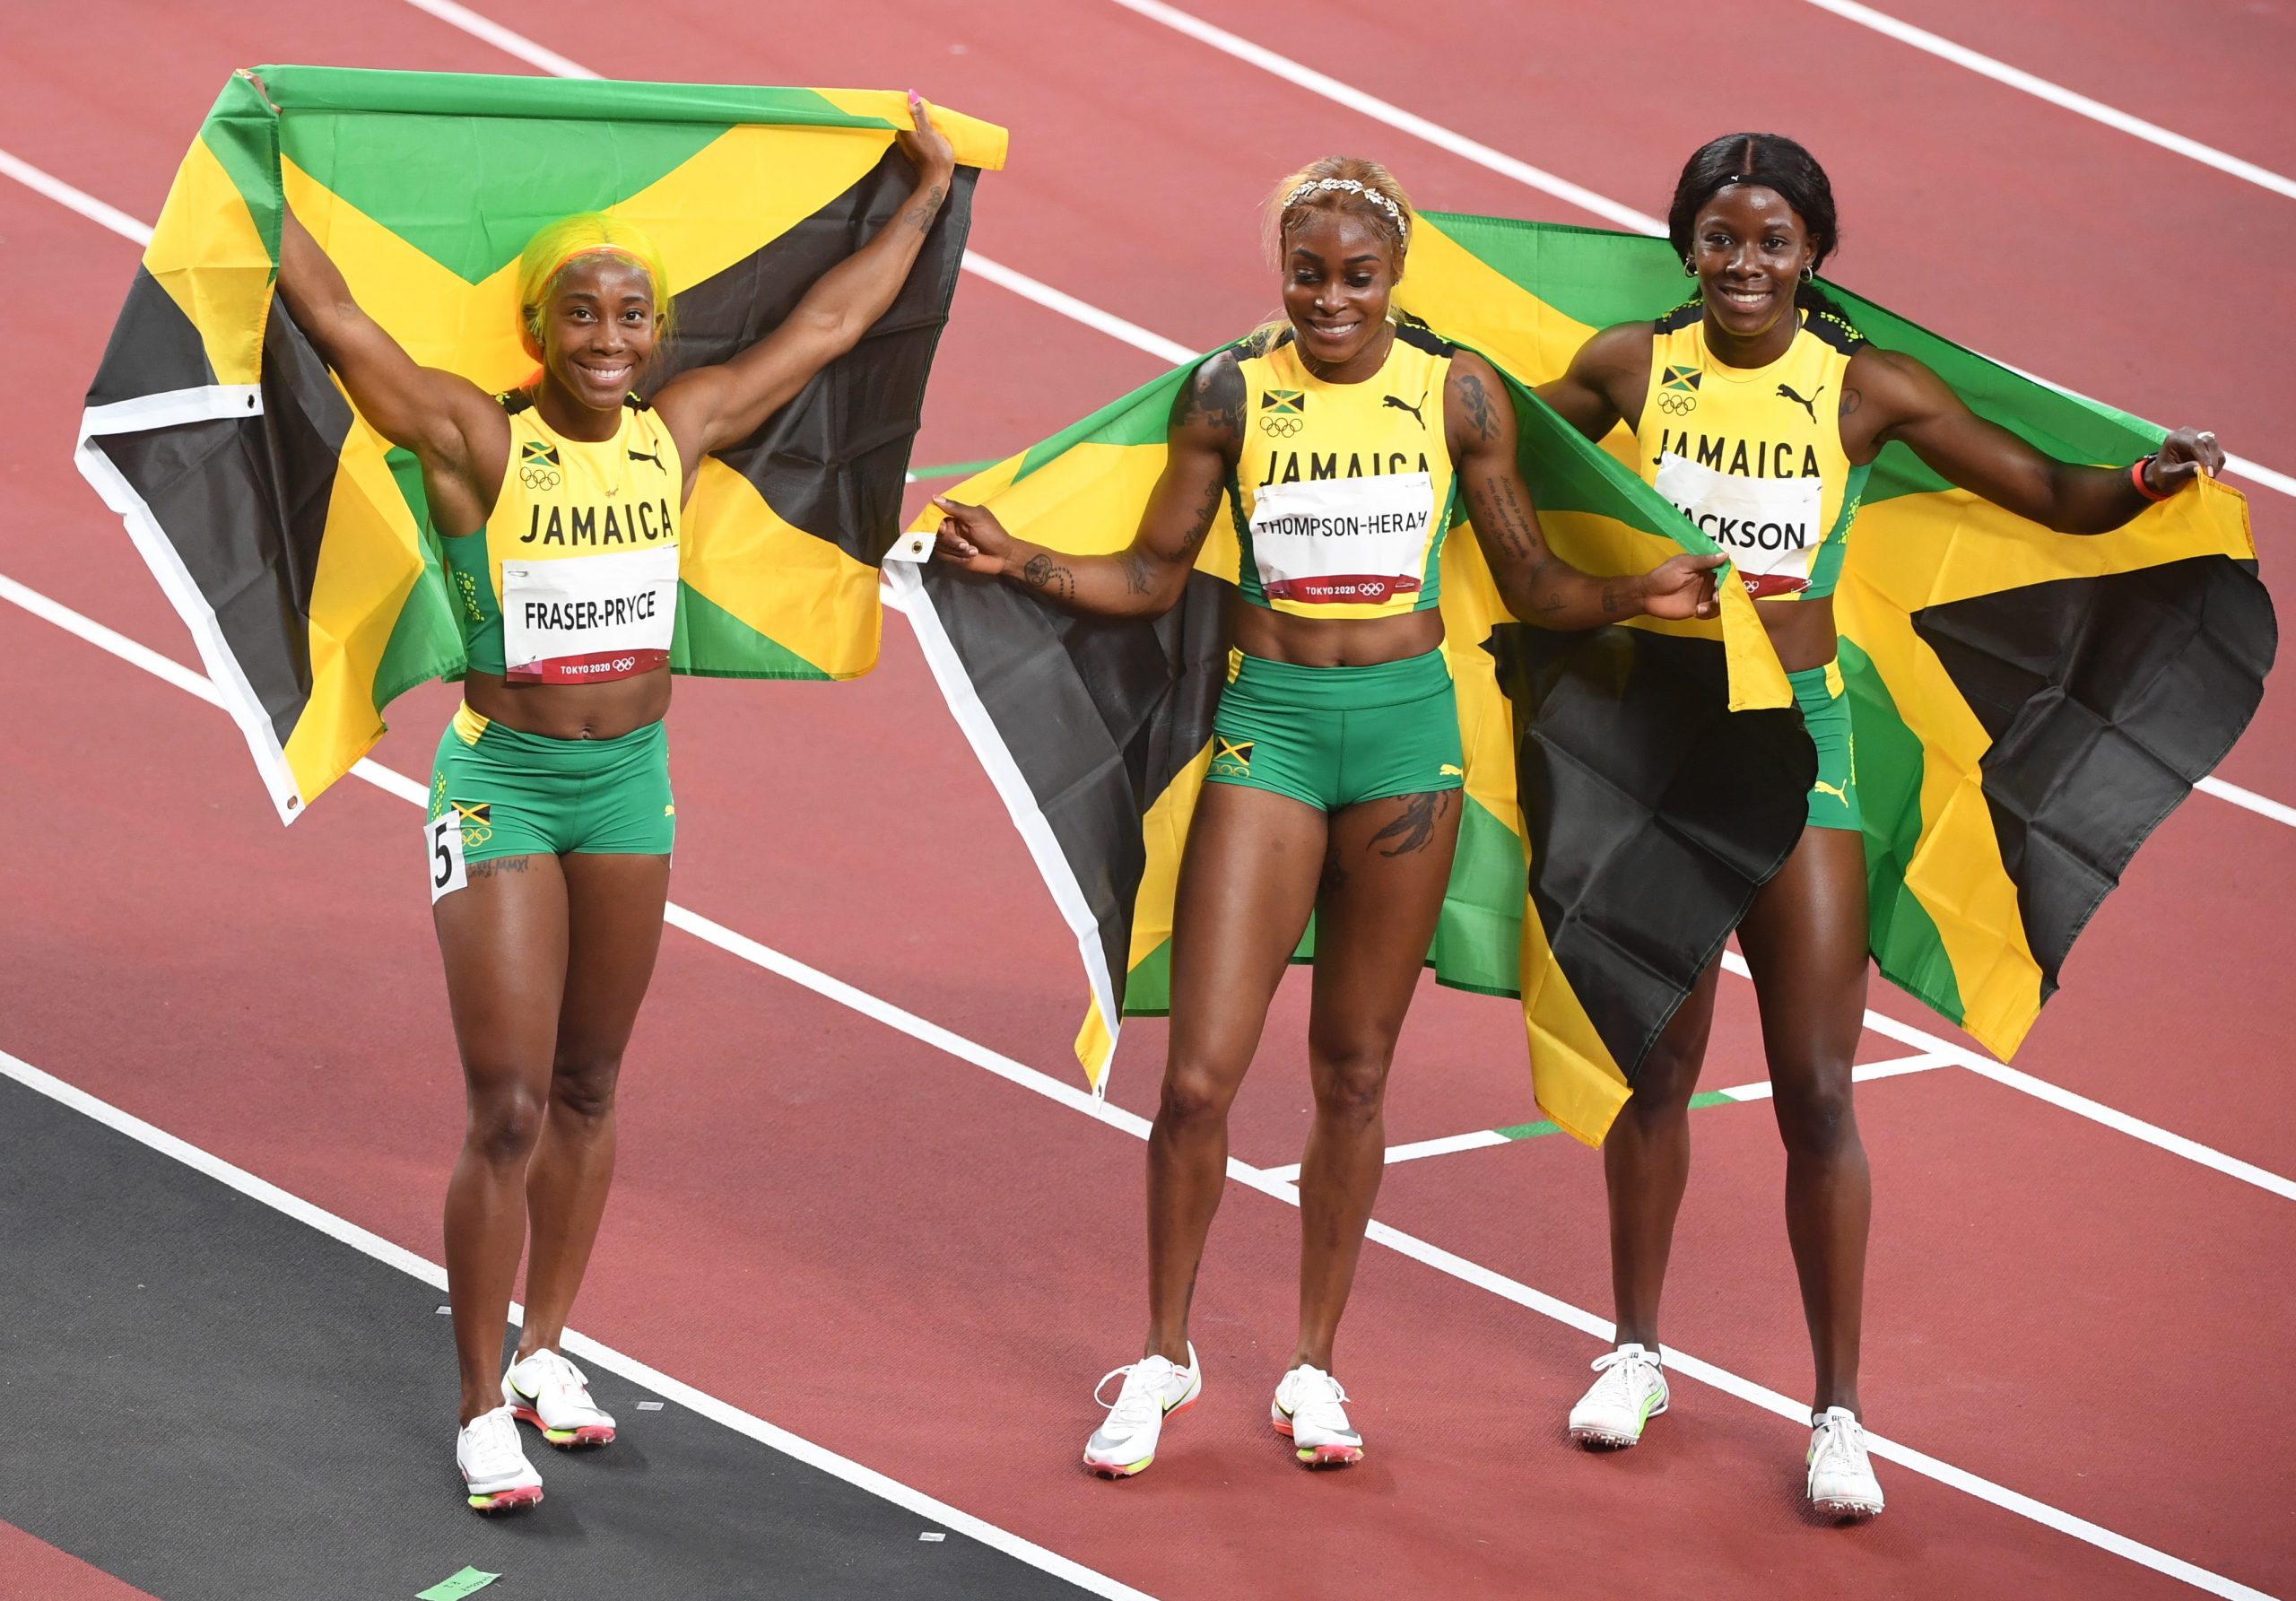 Clean sweep Tokyo 2020 Olympic Games 100m podium finishers Elaine Thompson-Herah, Shelly-Ann Fraser-Pryce, and Shericka Jackson in Paris Diamond League